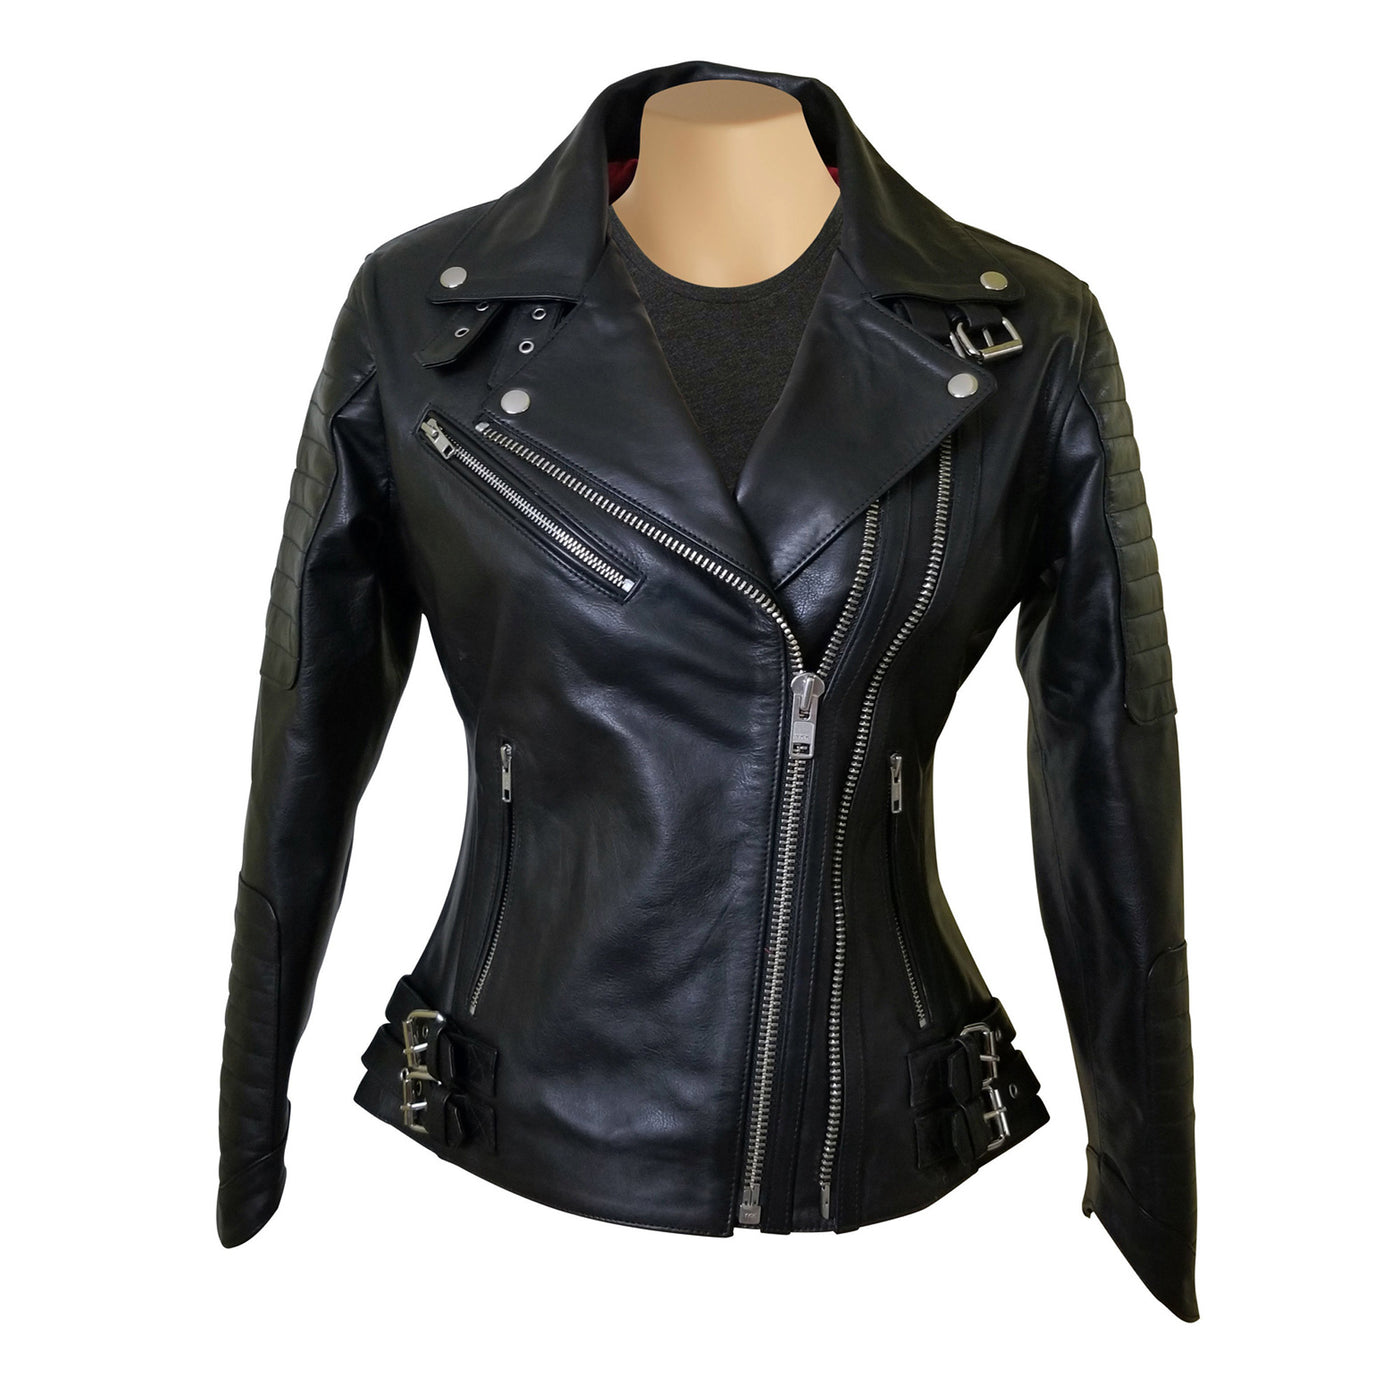 Miyah's double zipper leather jacket with ribbed stitching details